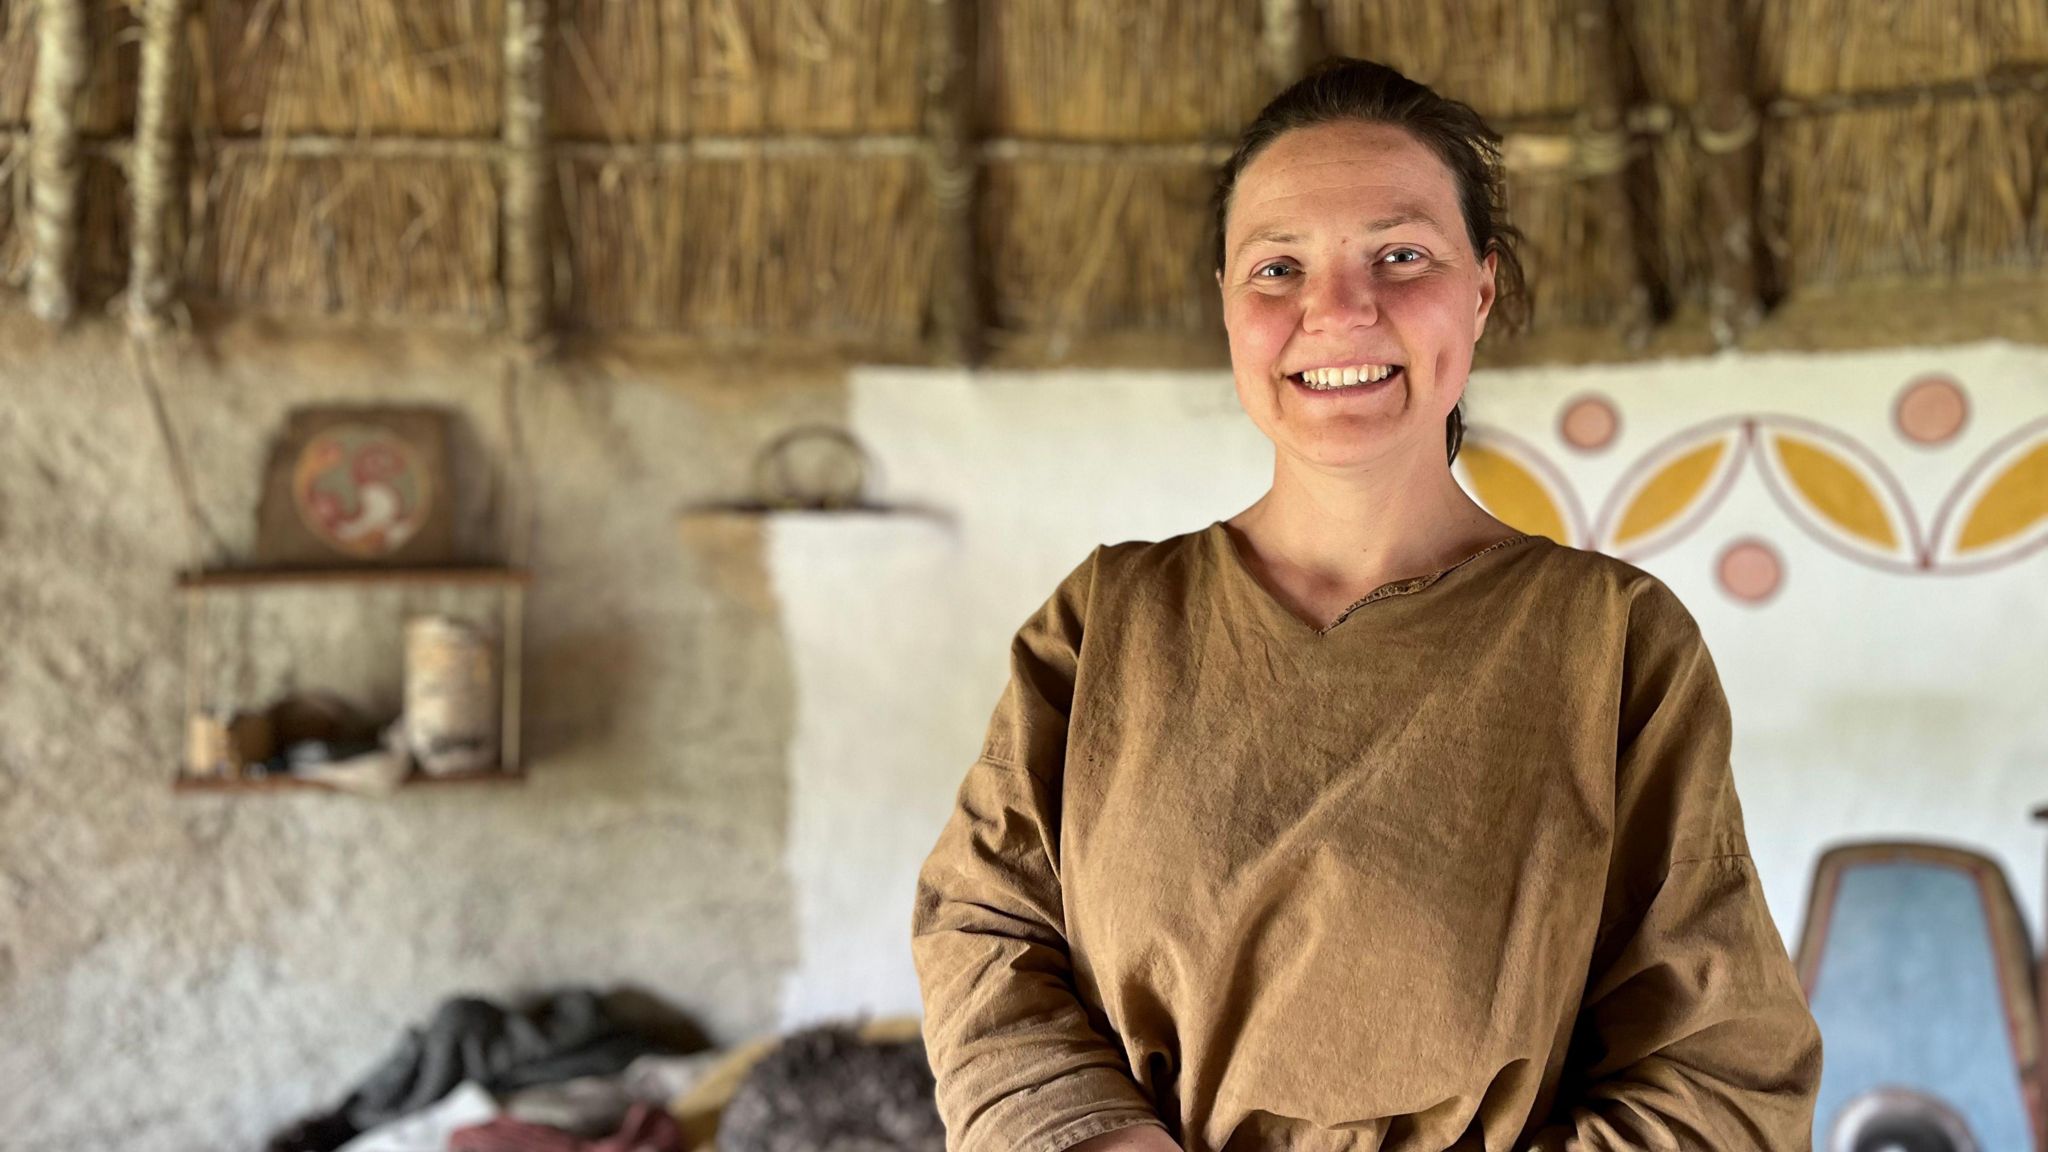 A woman smiling to camera, who is wearing a brown top and stood inside an iron age roundhouse, with paintings on the wall behind and the bottom of a thatched roof visable.